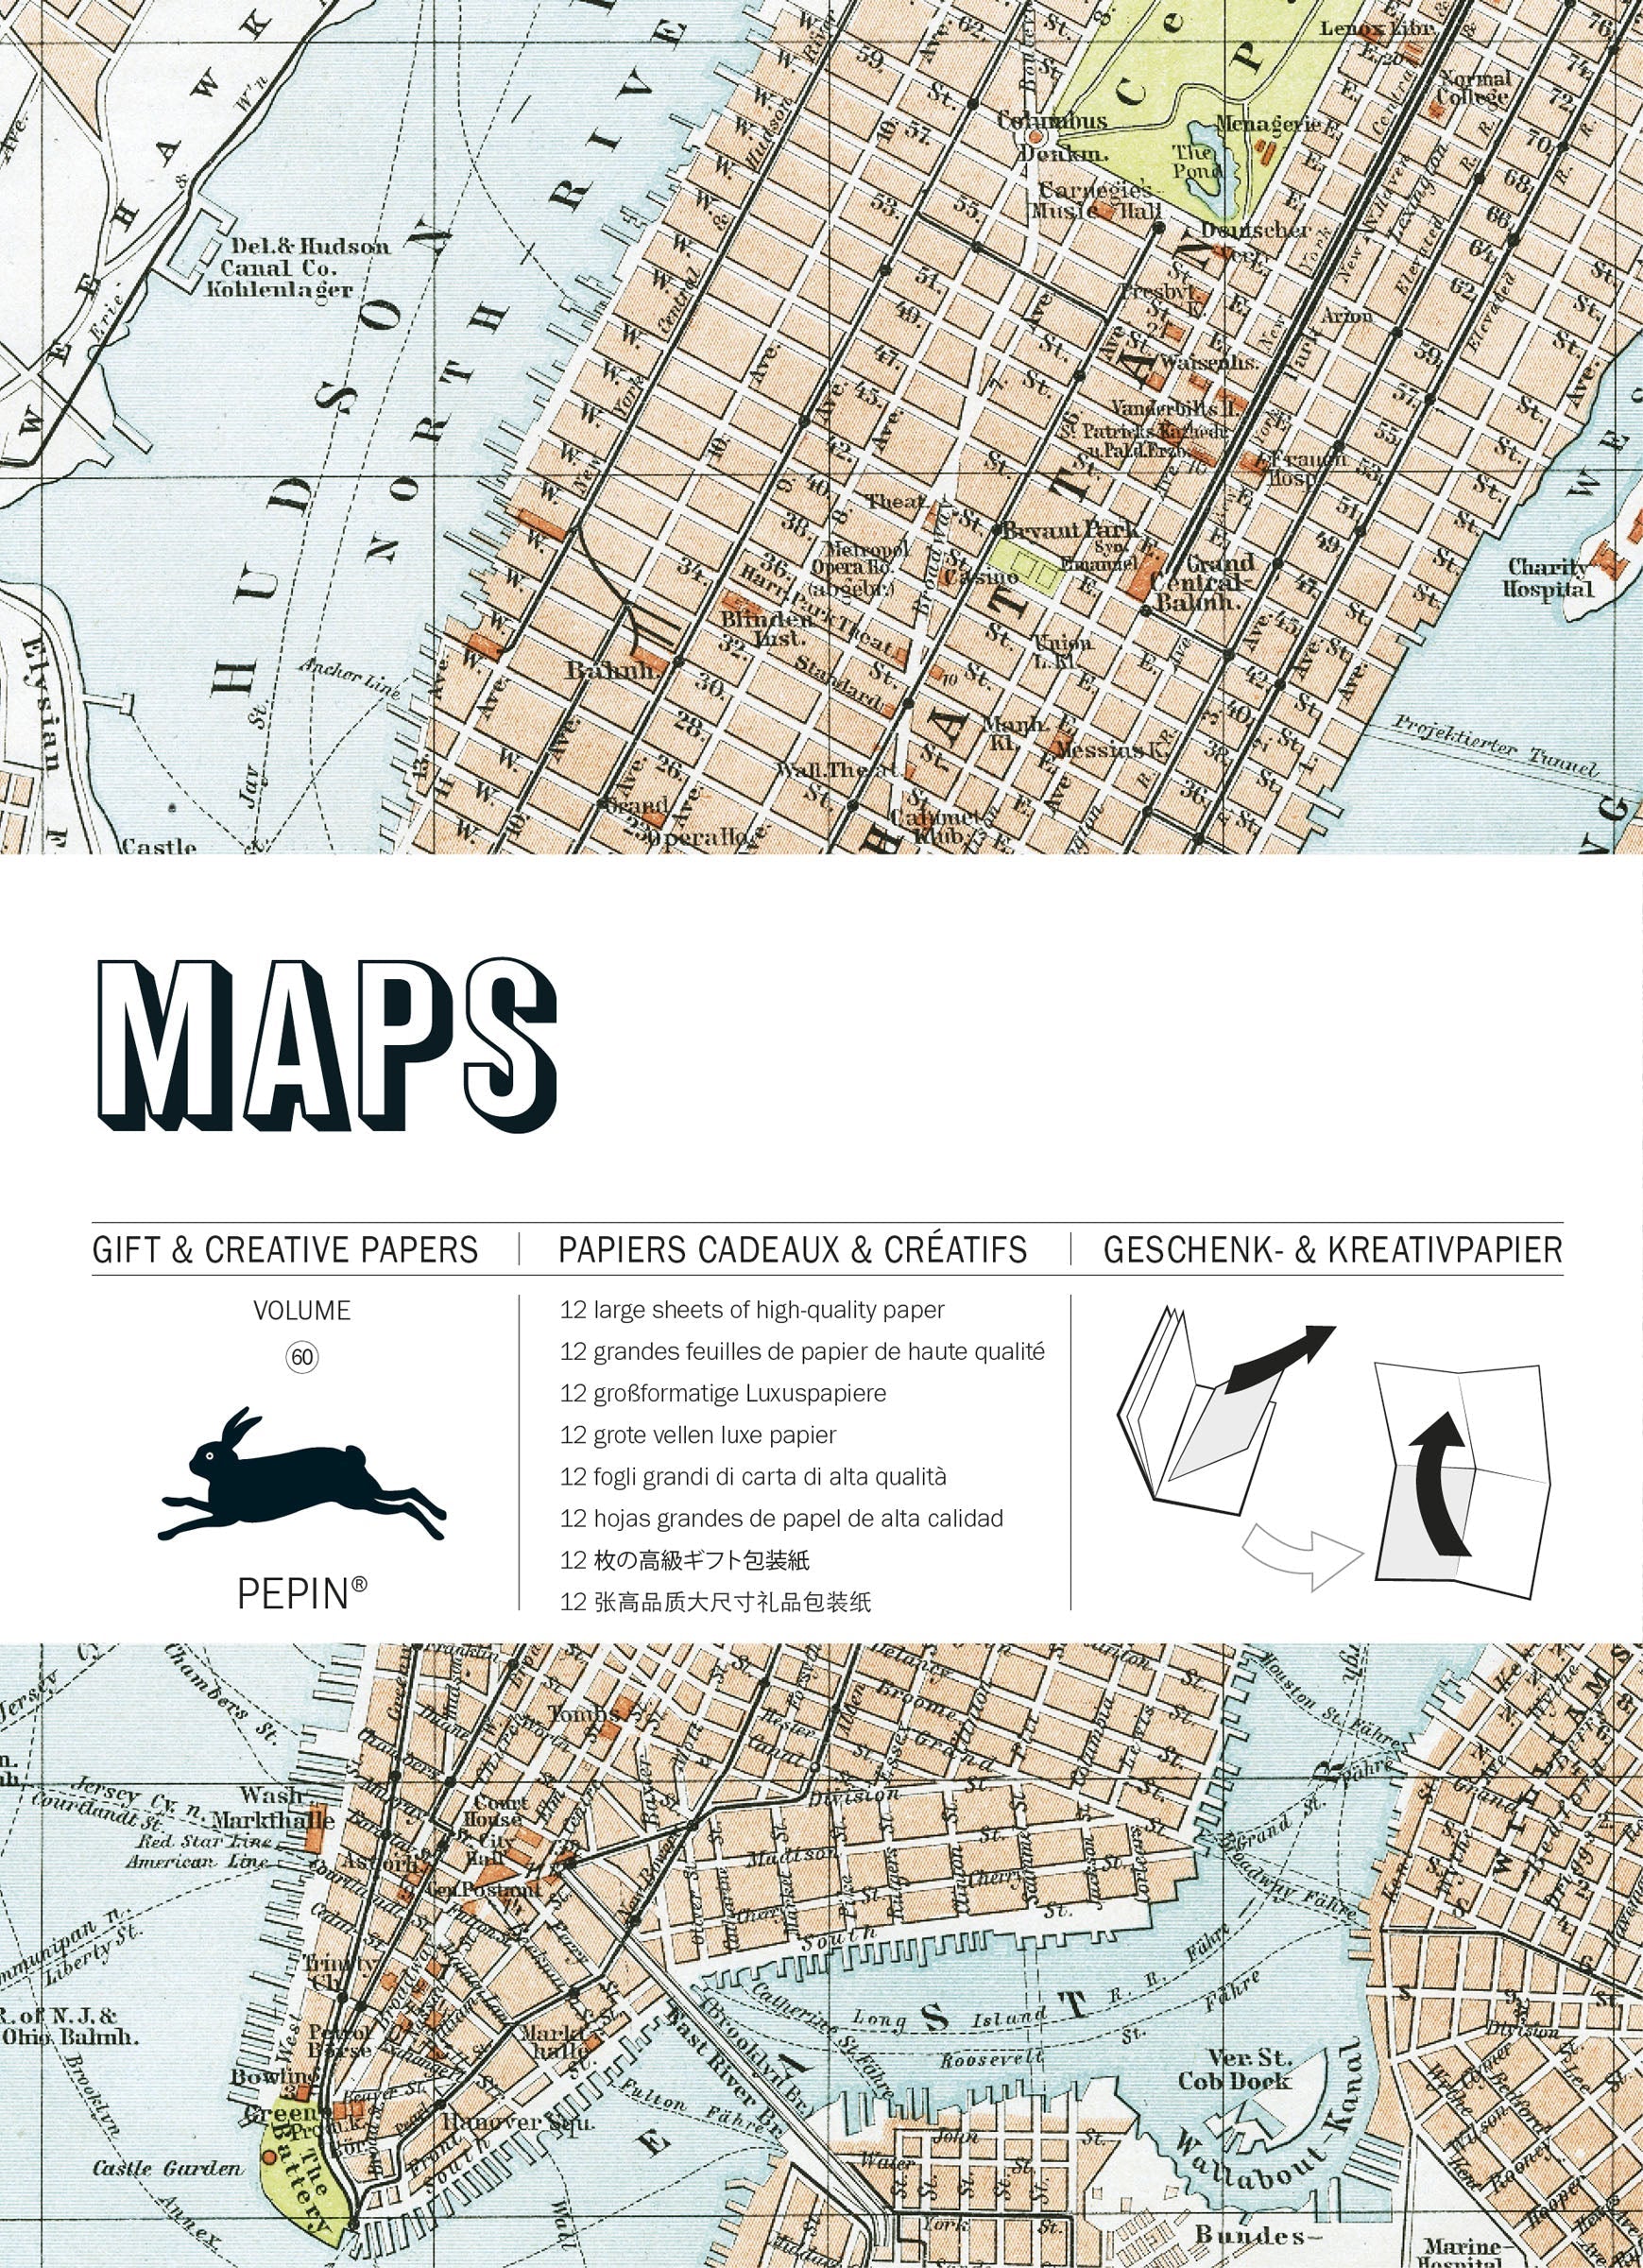 Gift & creative papers - Maps